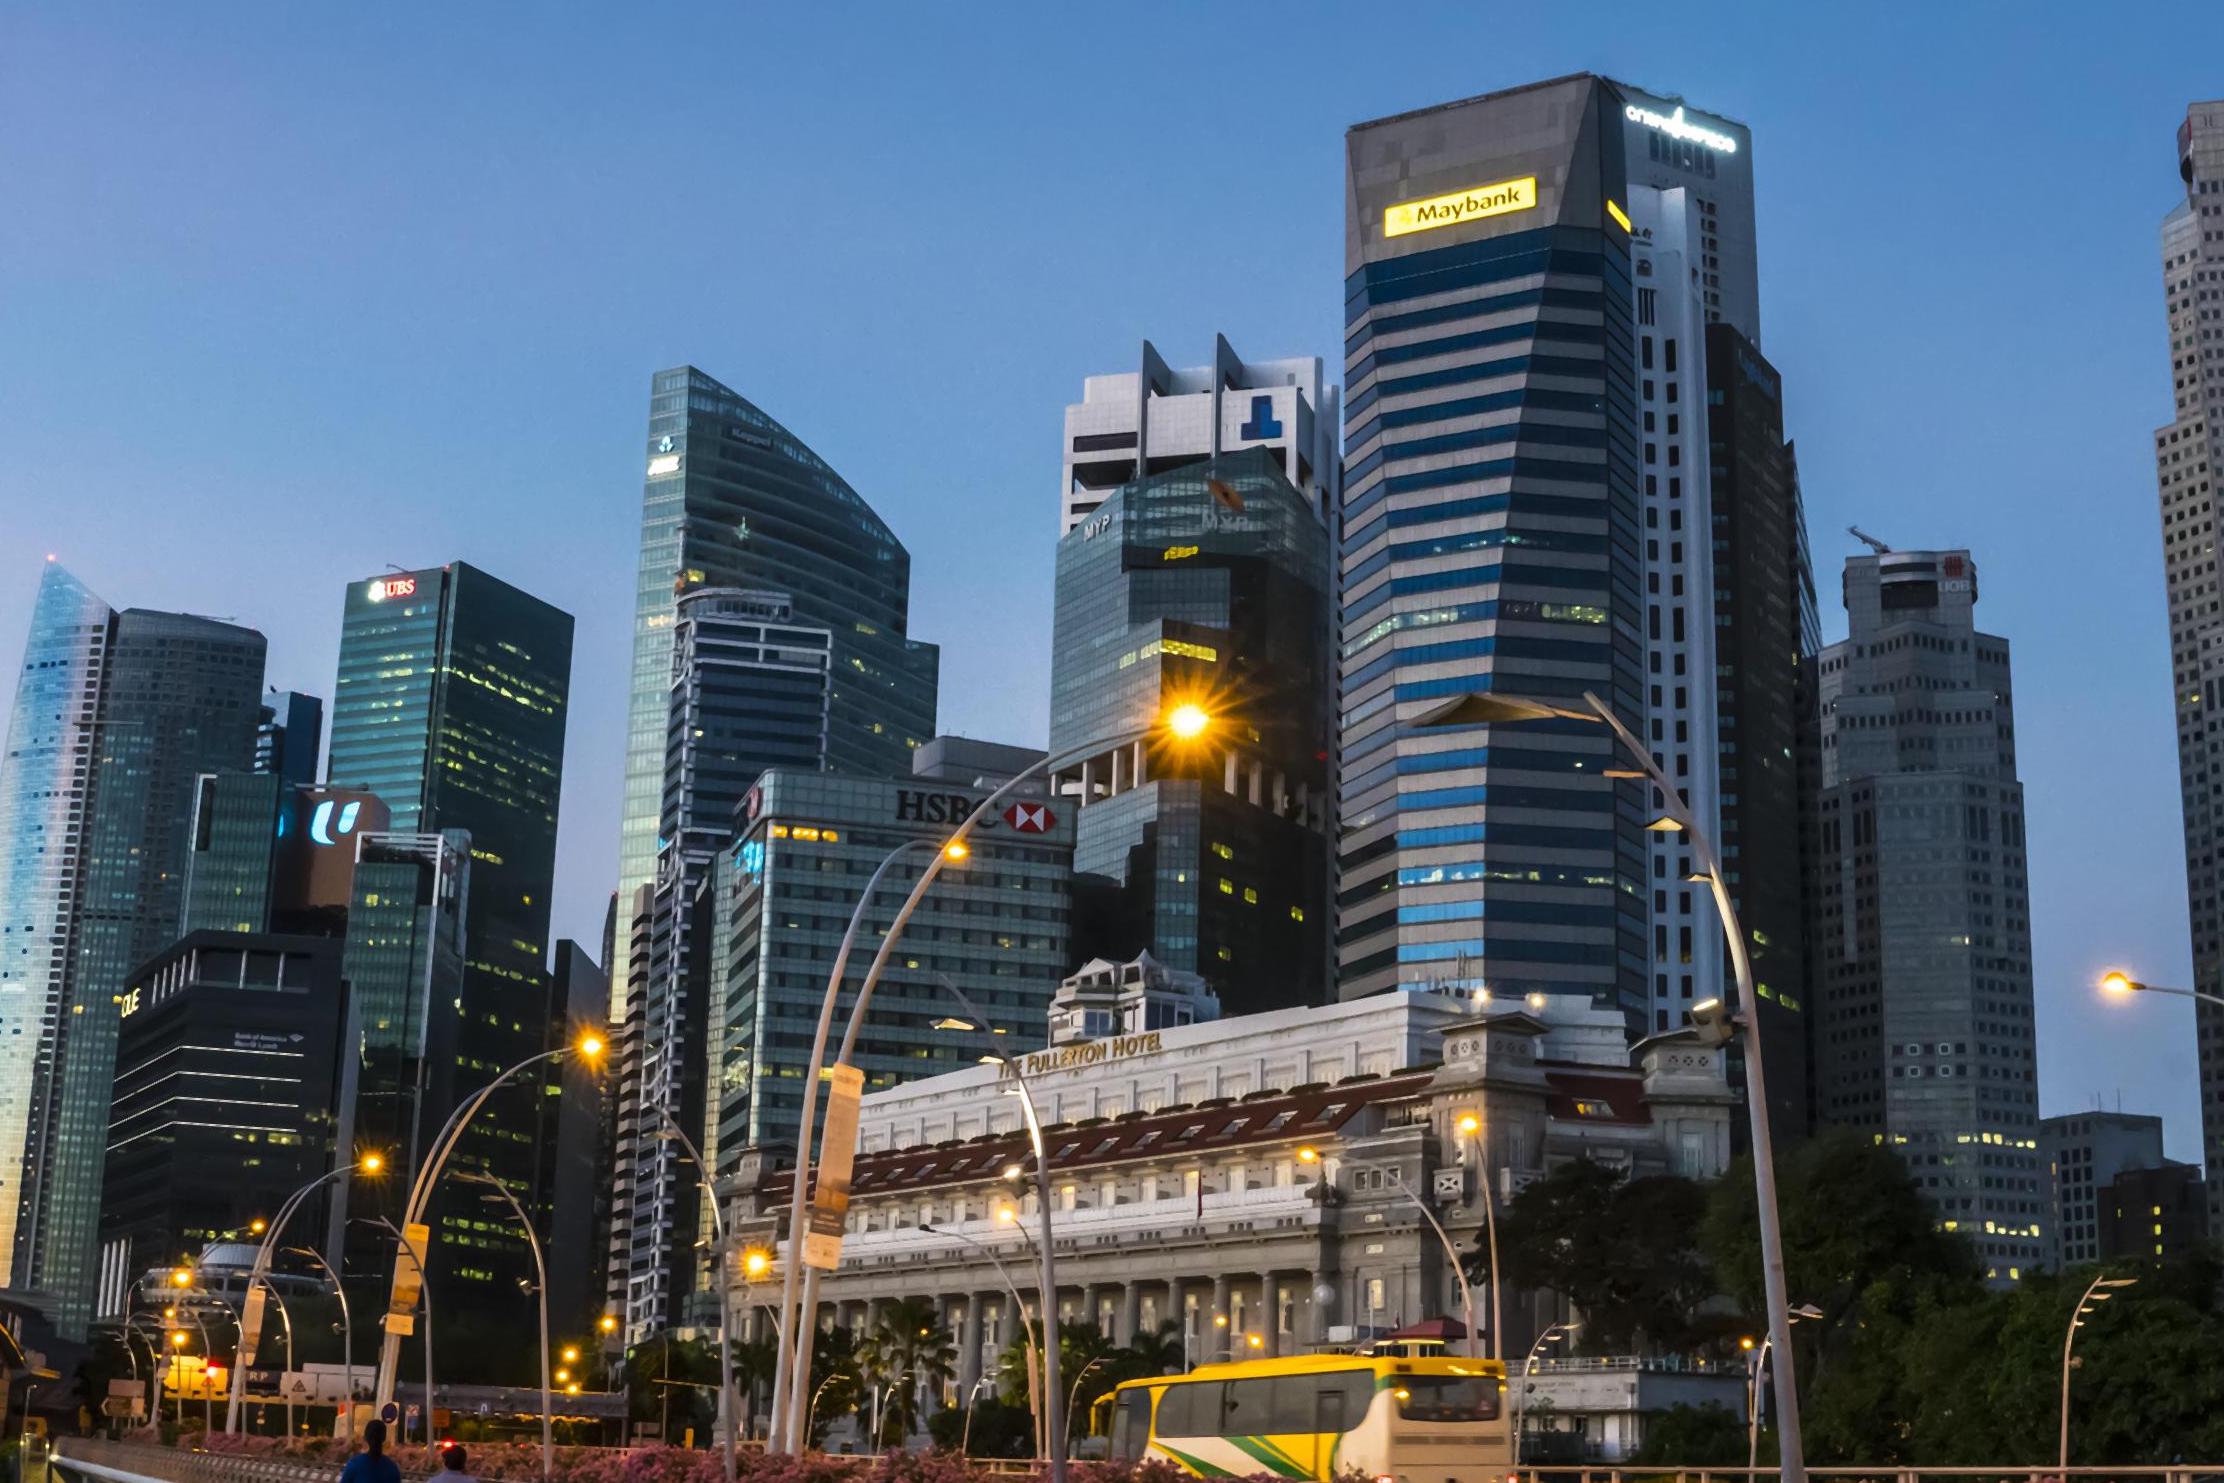 Singapore's business district is a key destination for morning commuters